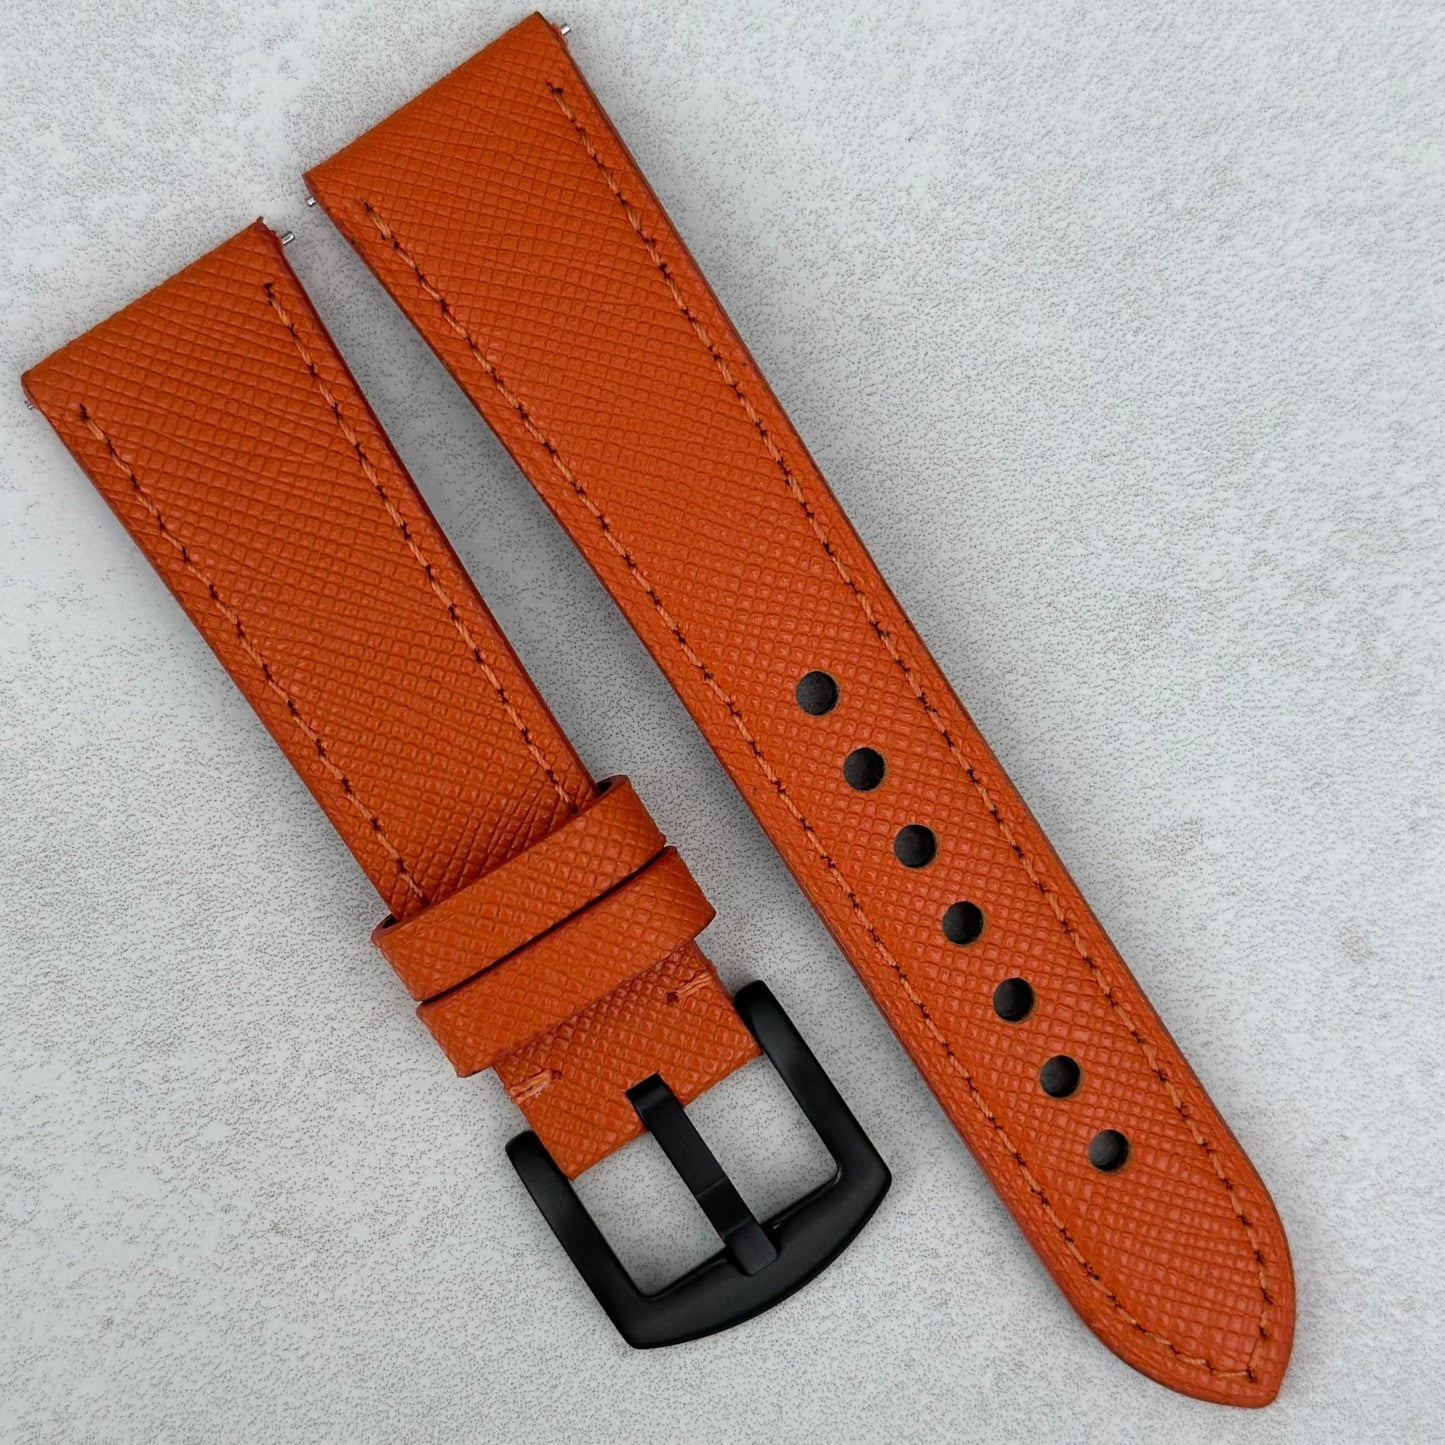 Orange Saffiano Leather watch strap. PVD Black Brushed 316L stainless steel buckle. 18mm, 20mm, 22mm, 24mm. Watch And Strap.